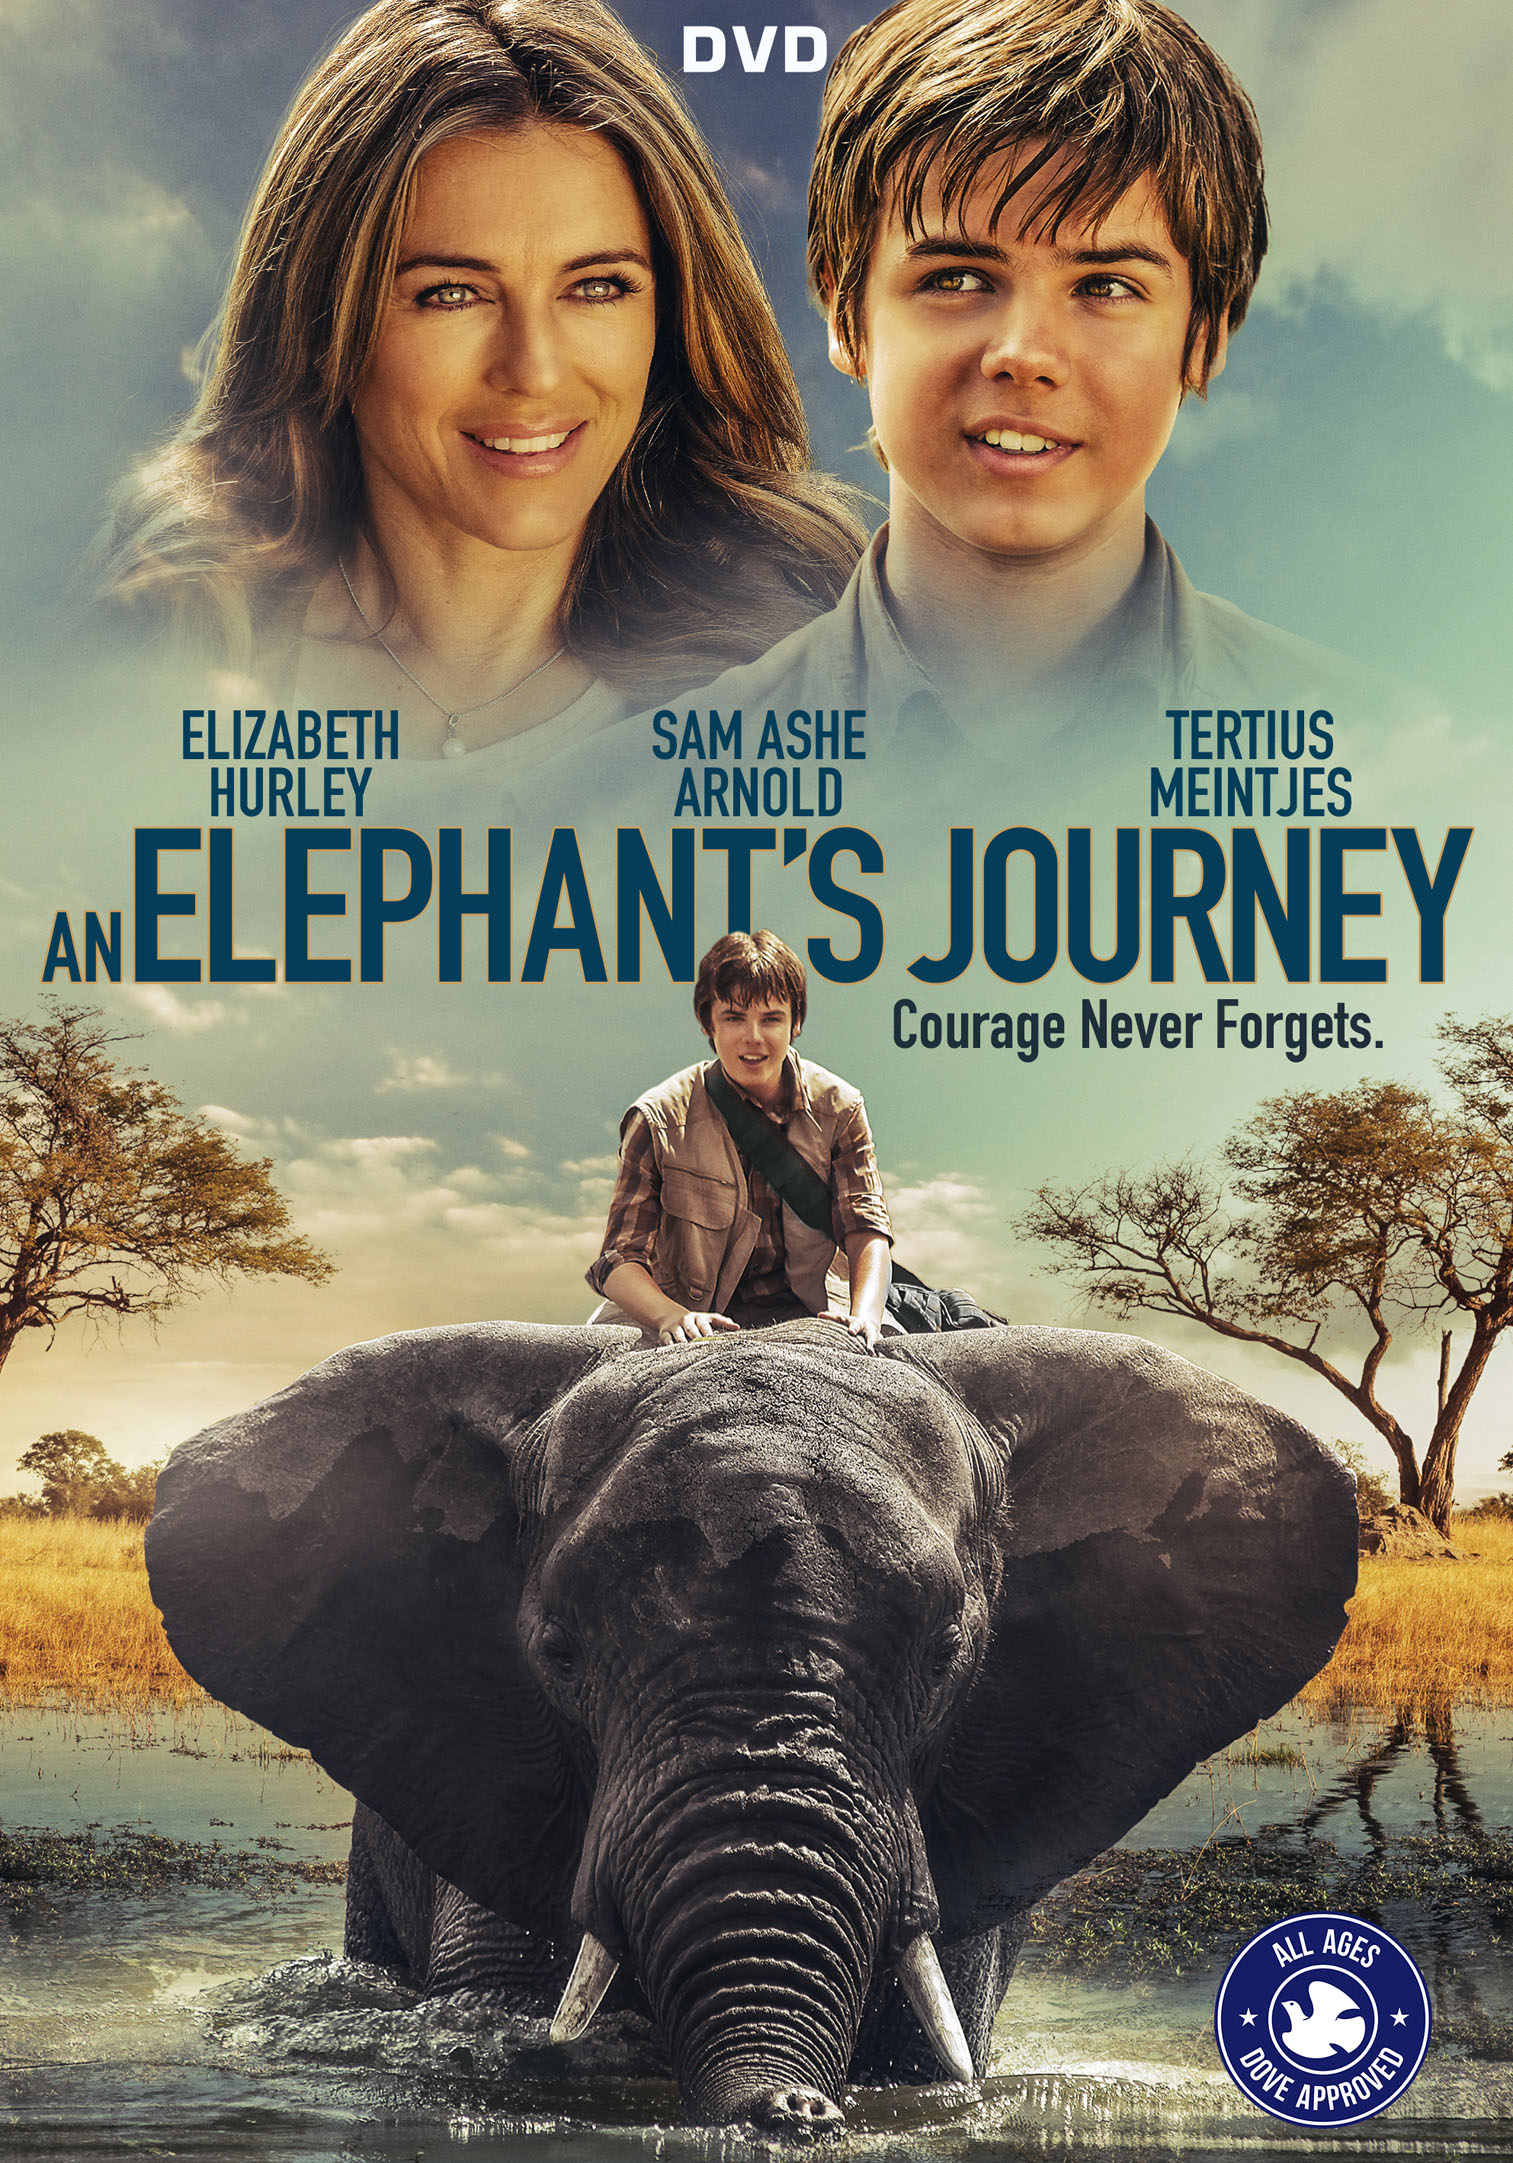 the elephant's journey review